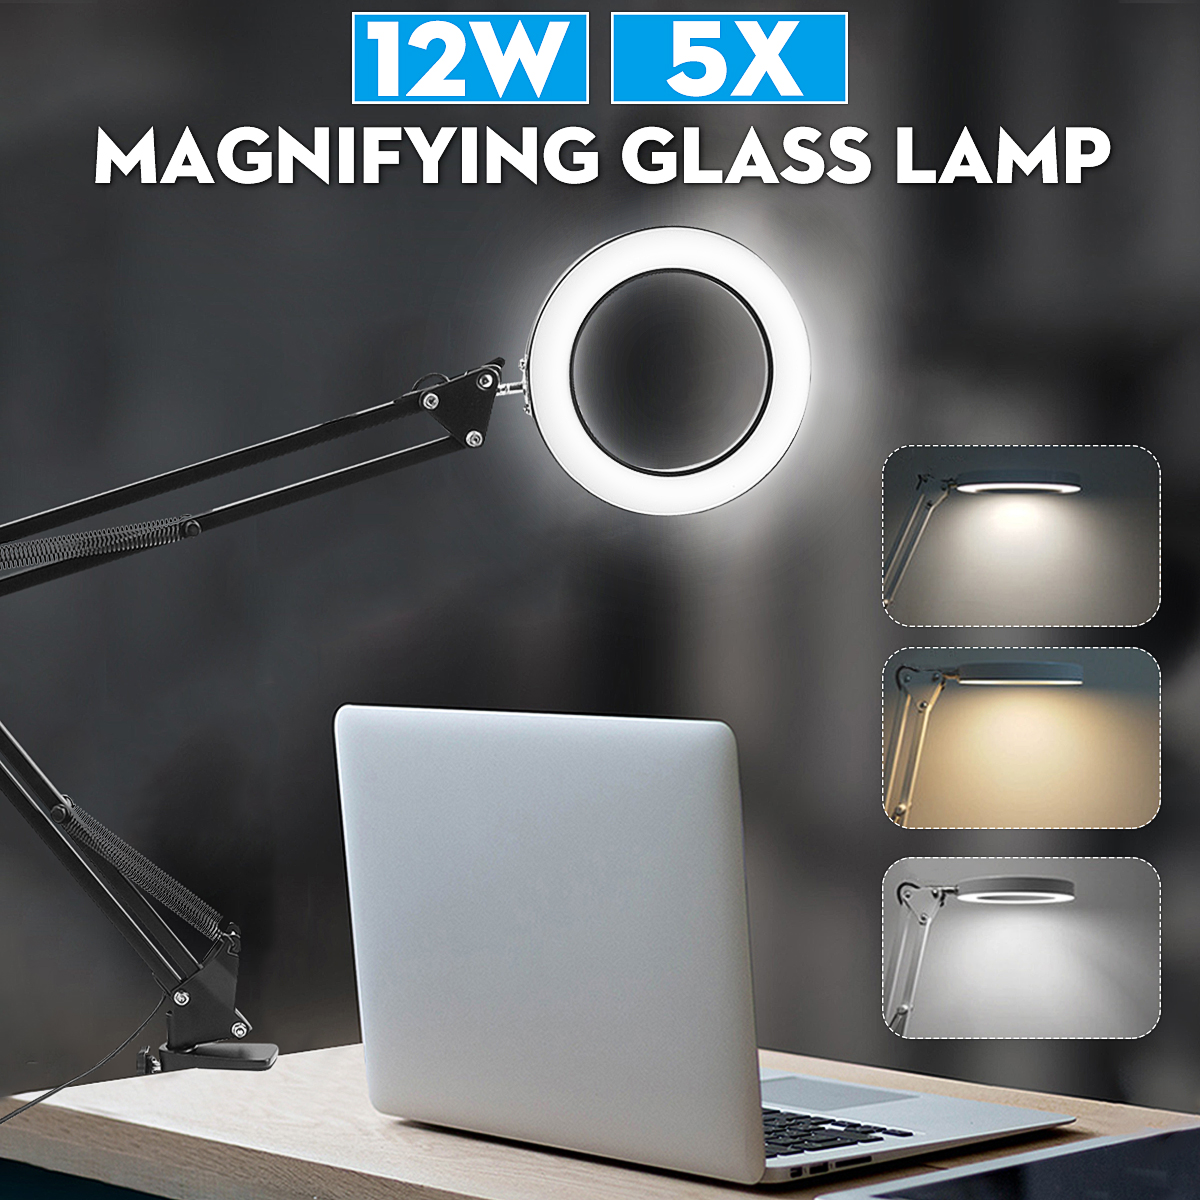 12W-5X-Magnifying-LED-Desk-Table-Light-Lens-Glass-Study-Work-Tattoo-Magnifier-Lamp-with-Clamp-1855912-1